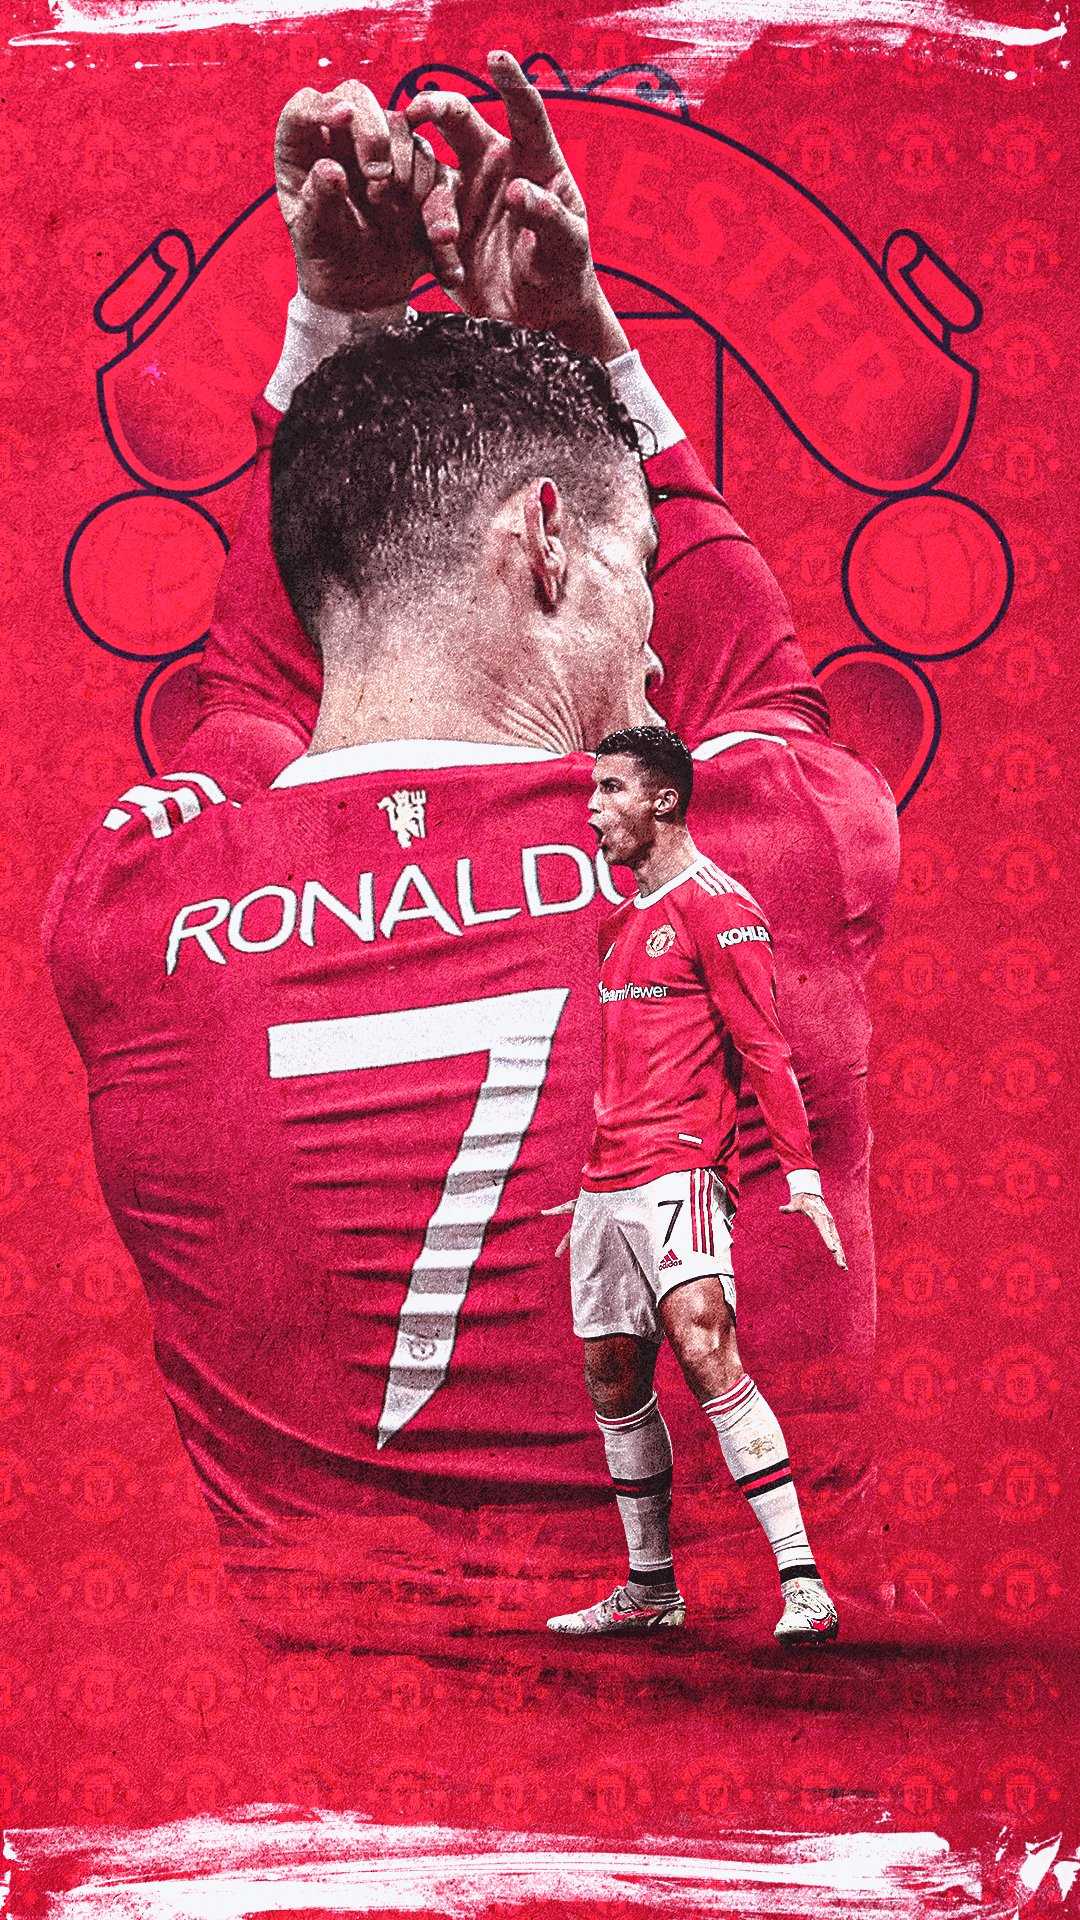 cr7 wallpaper 2022 for iphone